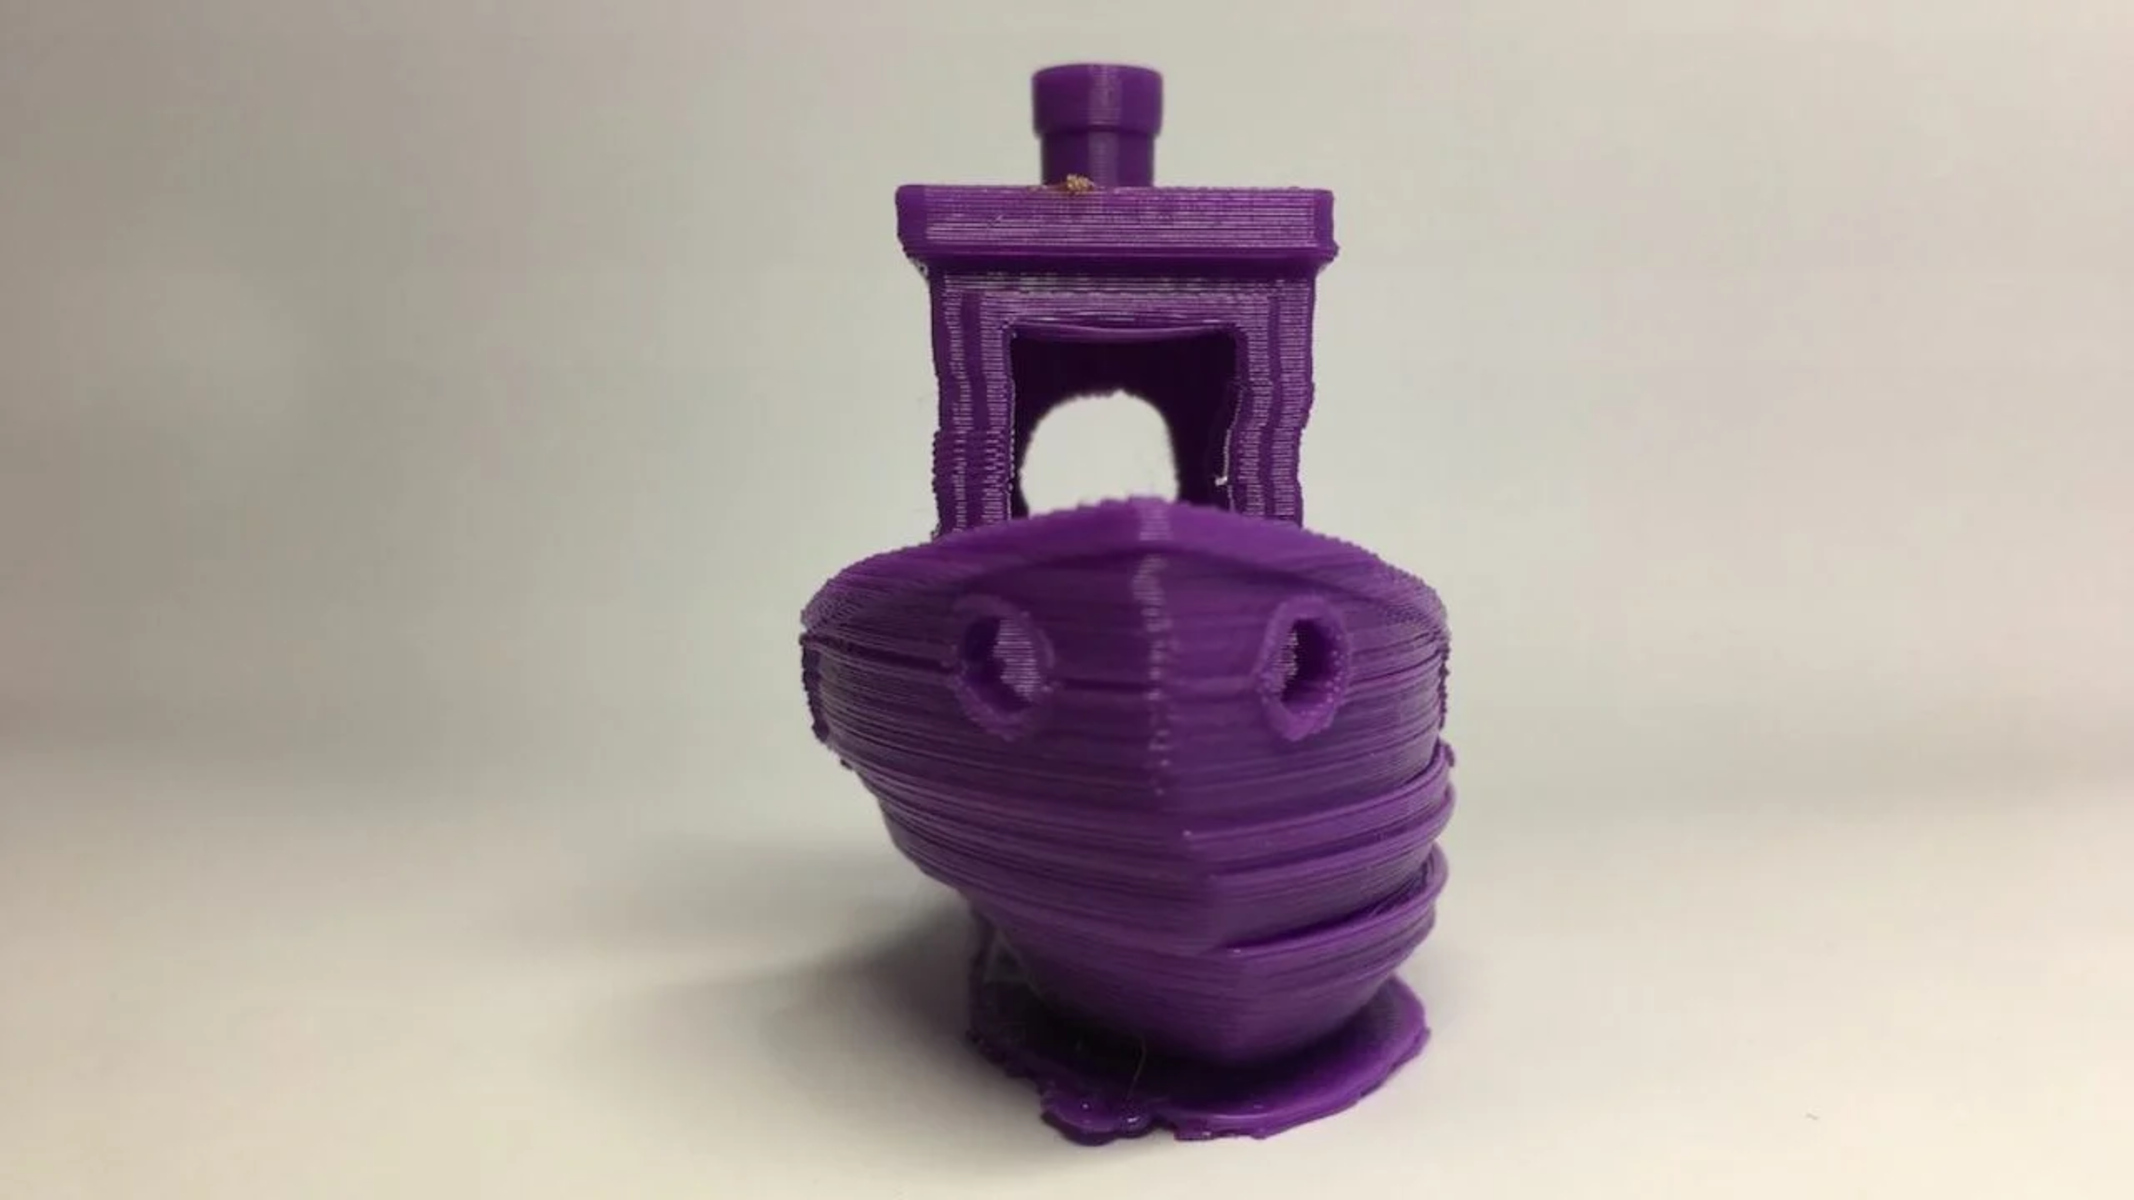 What Causes Layer Shifting In 3D Printing